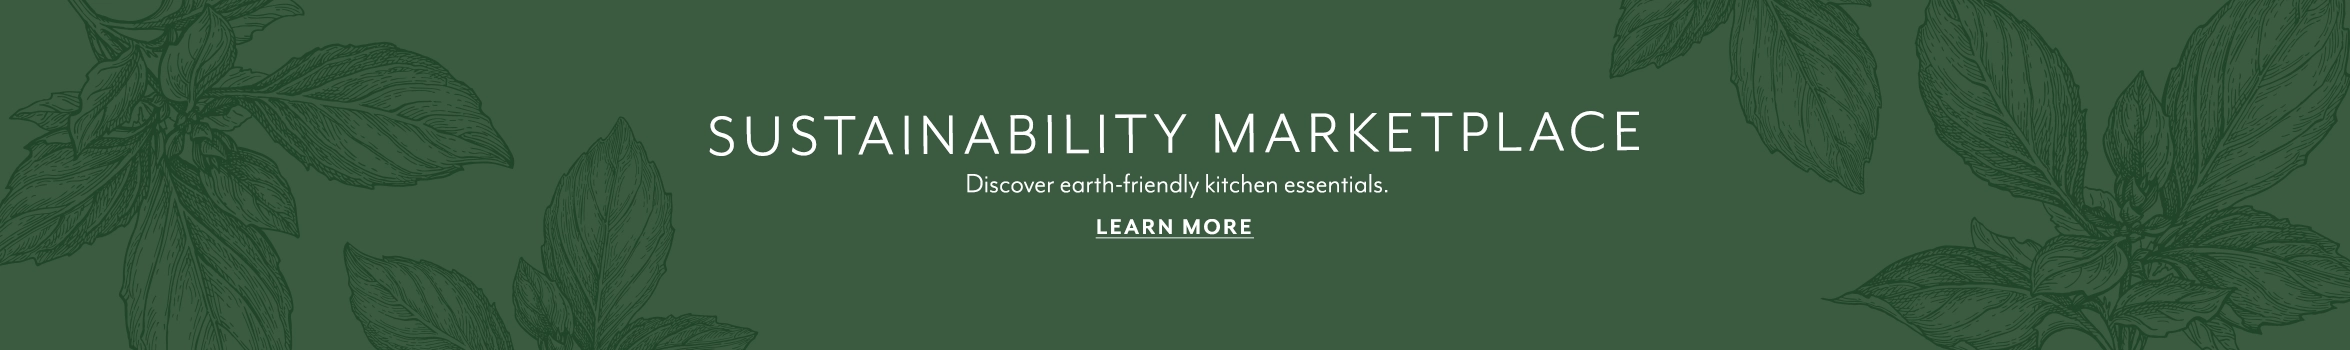 Sustainability Marketplace. Discover earth-friendly kitchen essentials. Learn More.